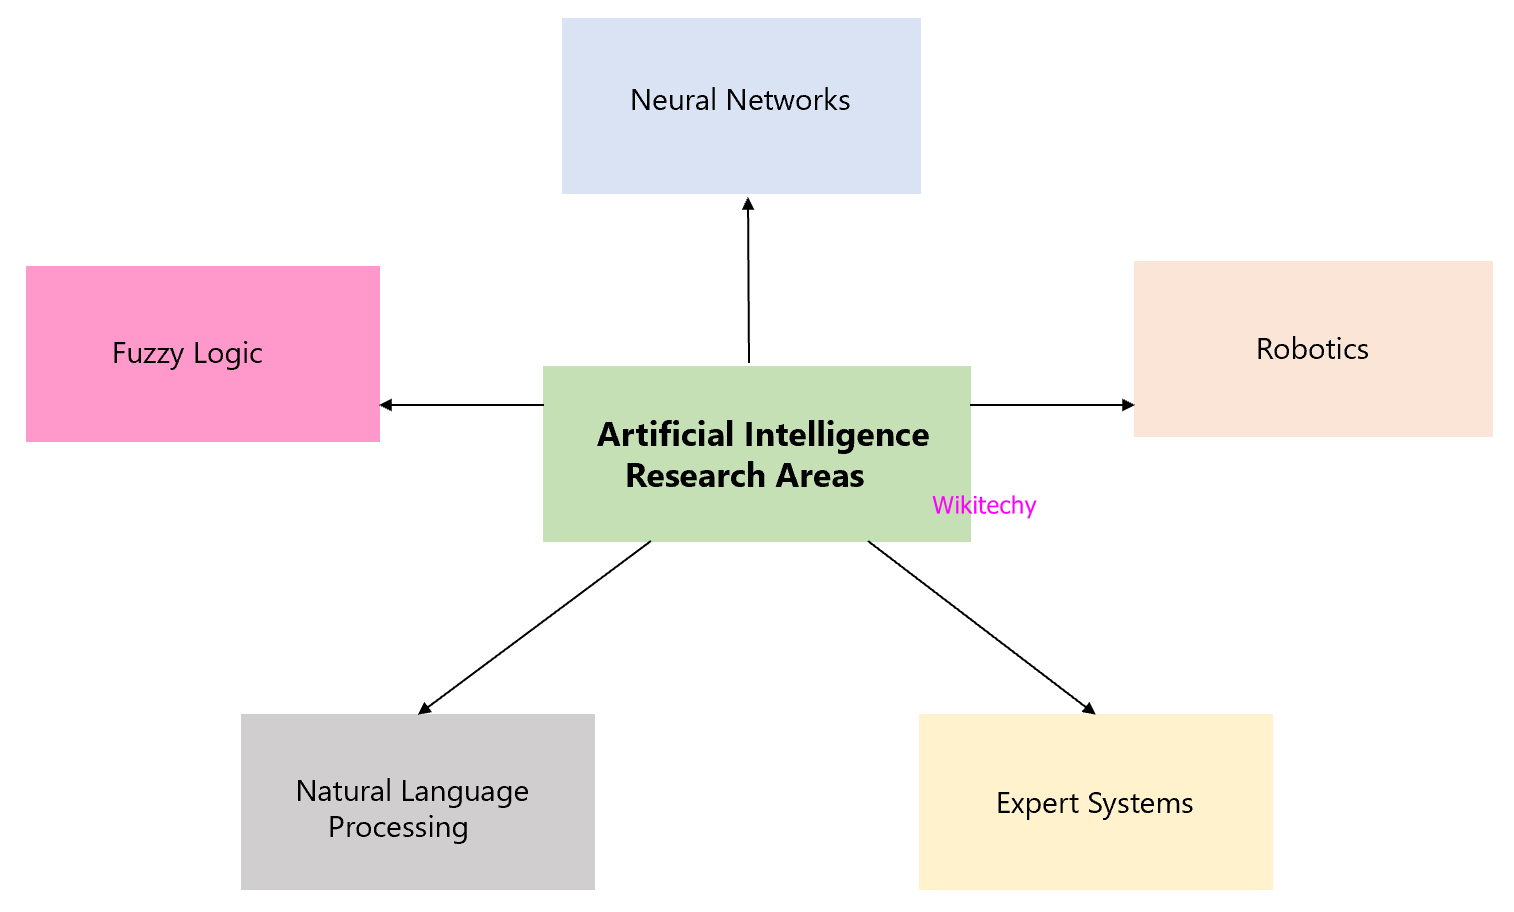 Artificial Intelligence Research Areas